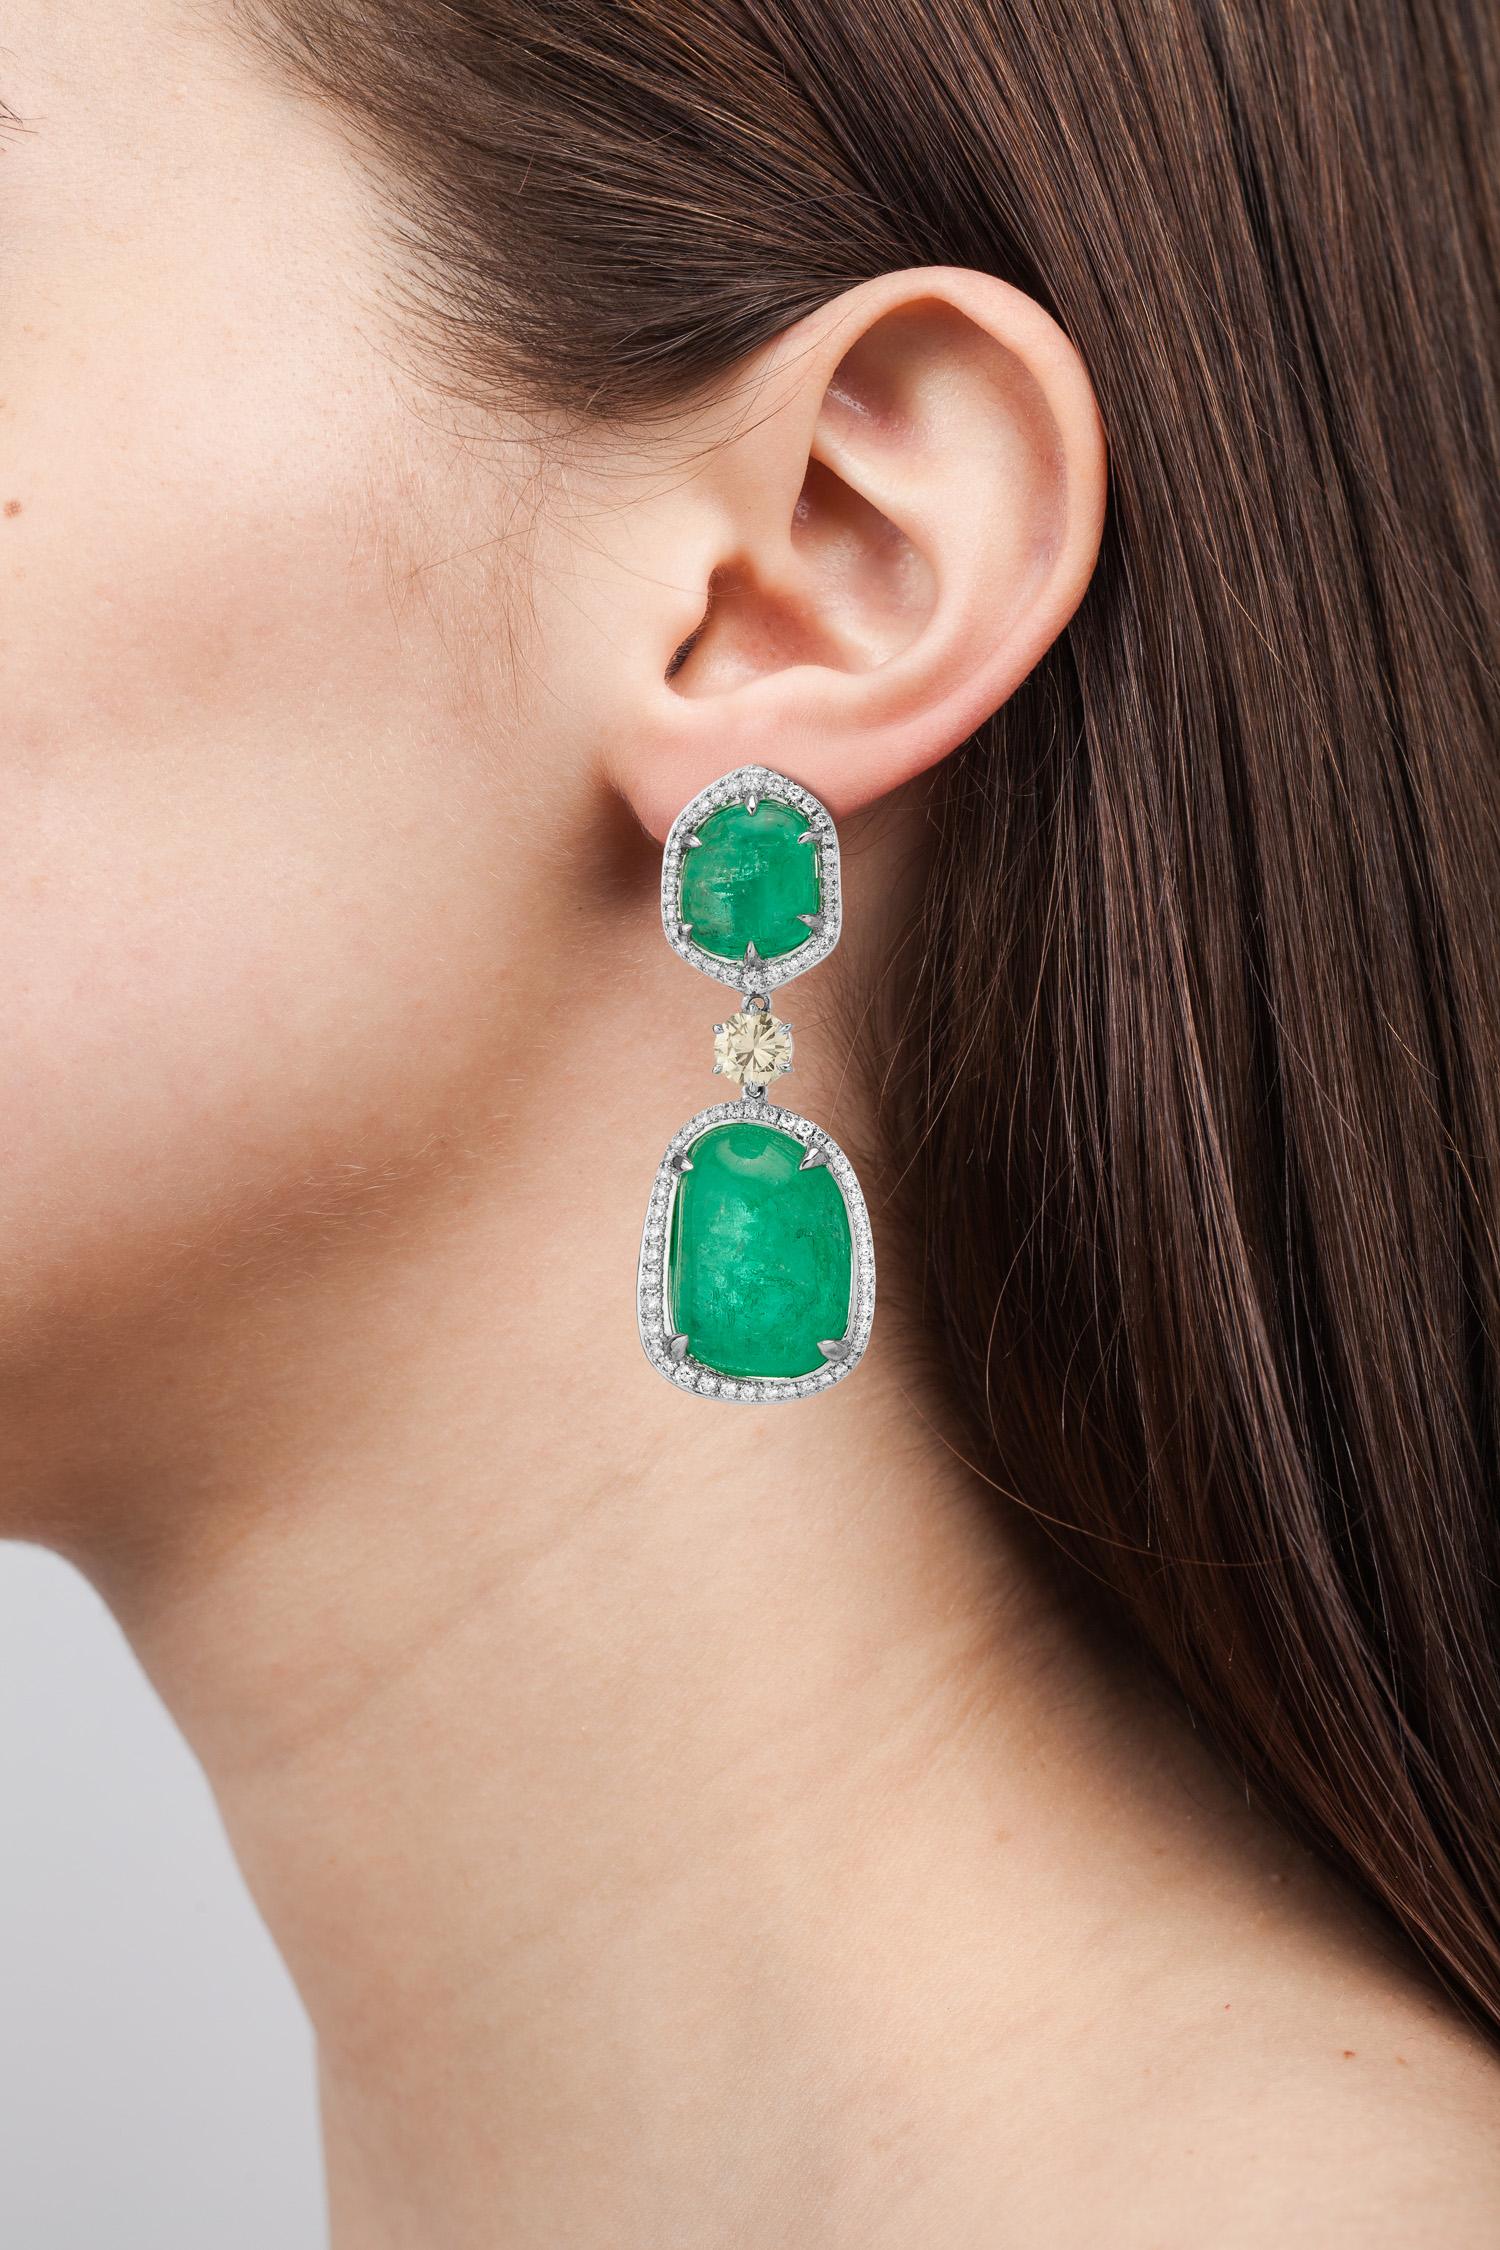 18 Karat white gold dangle earrings set with organic tumbled Muzo emeralds of 67.91 carats surrounded by 2.79 carats of round brilliant diamond pave.

Muzo Emerald Colombia Heritage Verity Earrings set with 67.91 carats Emerald.

Verity is a tribute